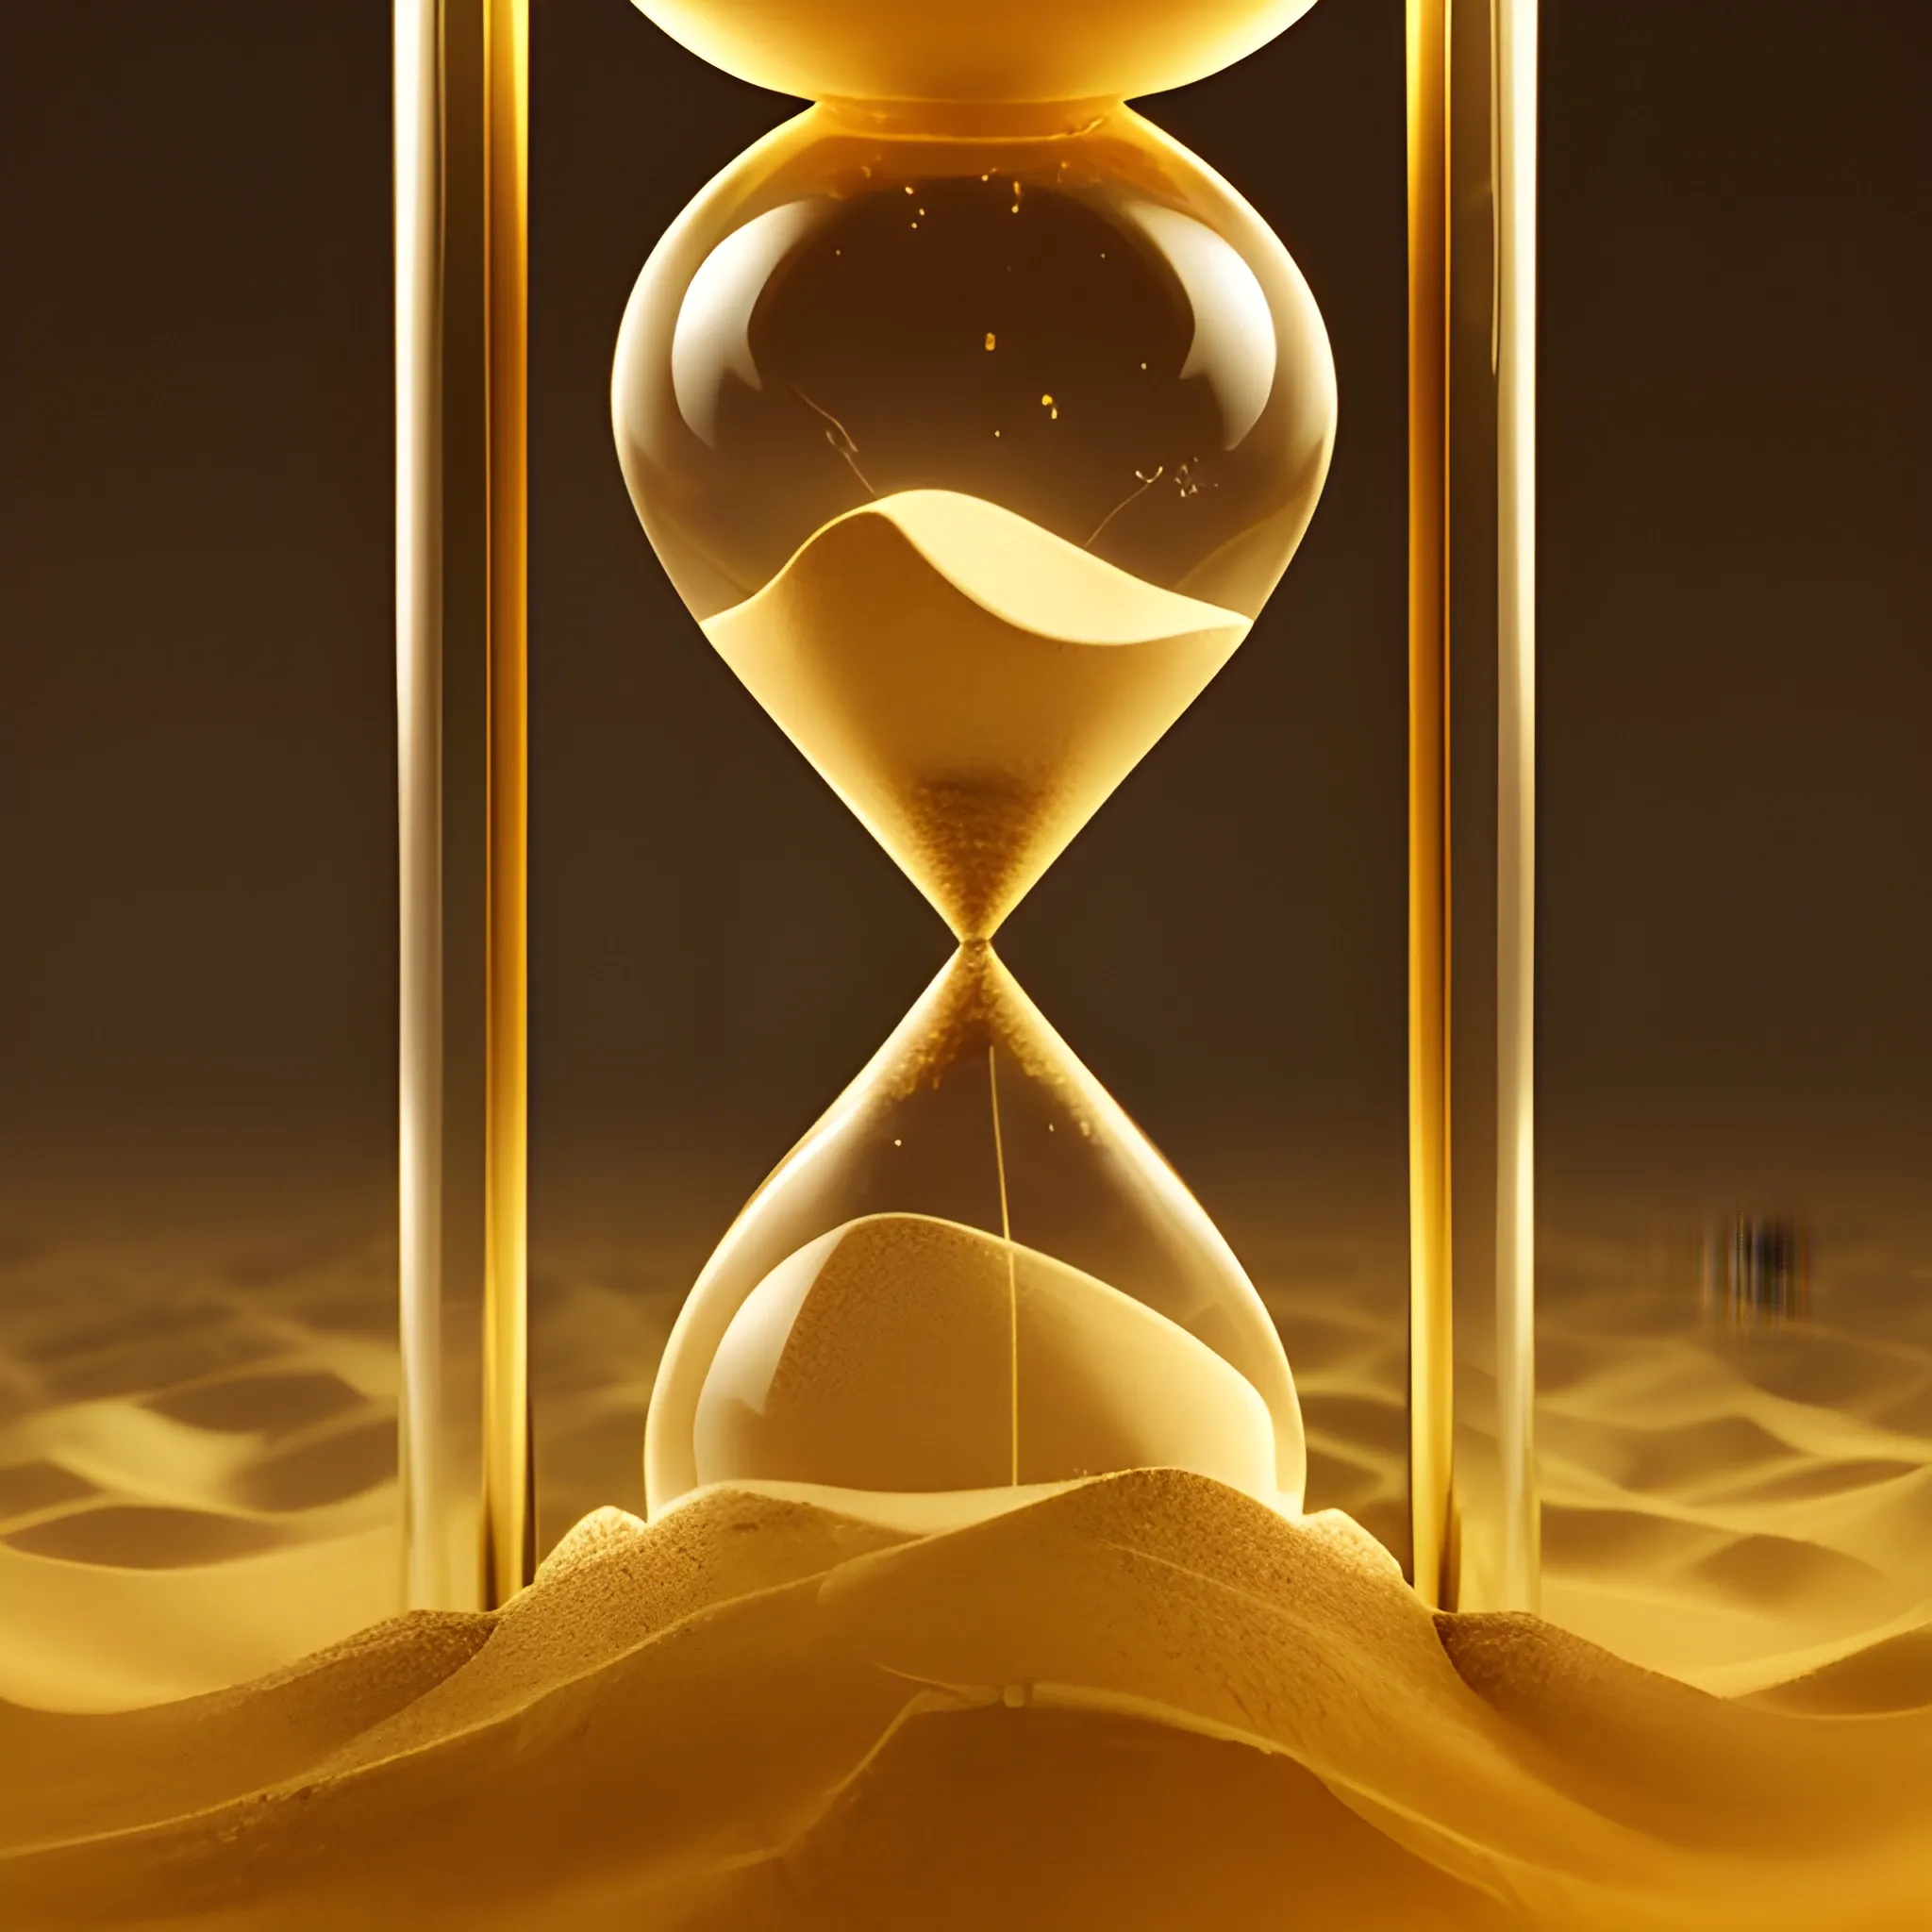 Hourglass with golden sand, at the bottom of the hourglass there are figures of coins made of sand, light beige background, high detail, photorealistic picture